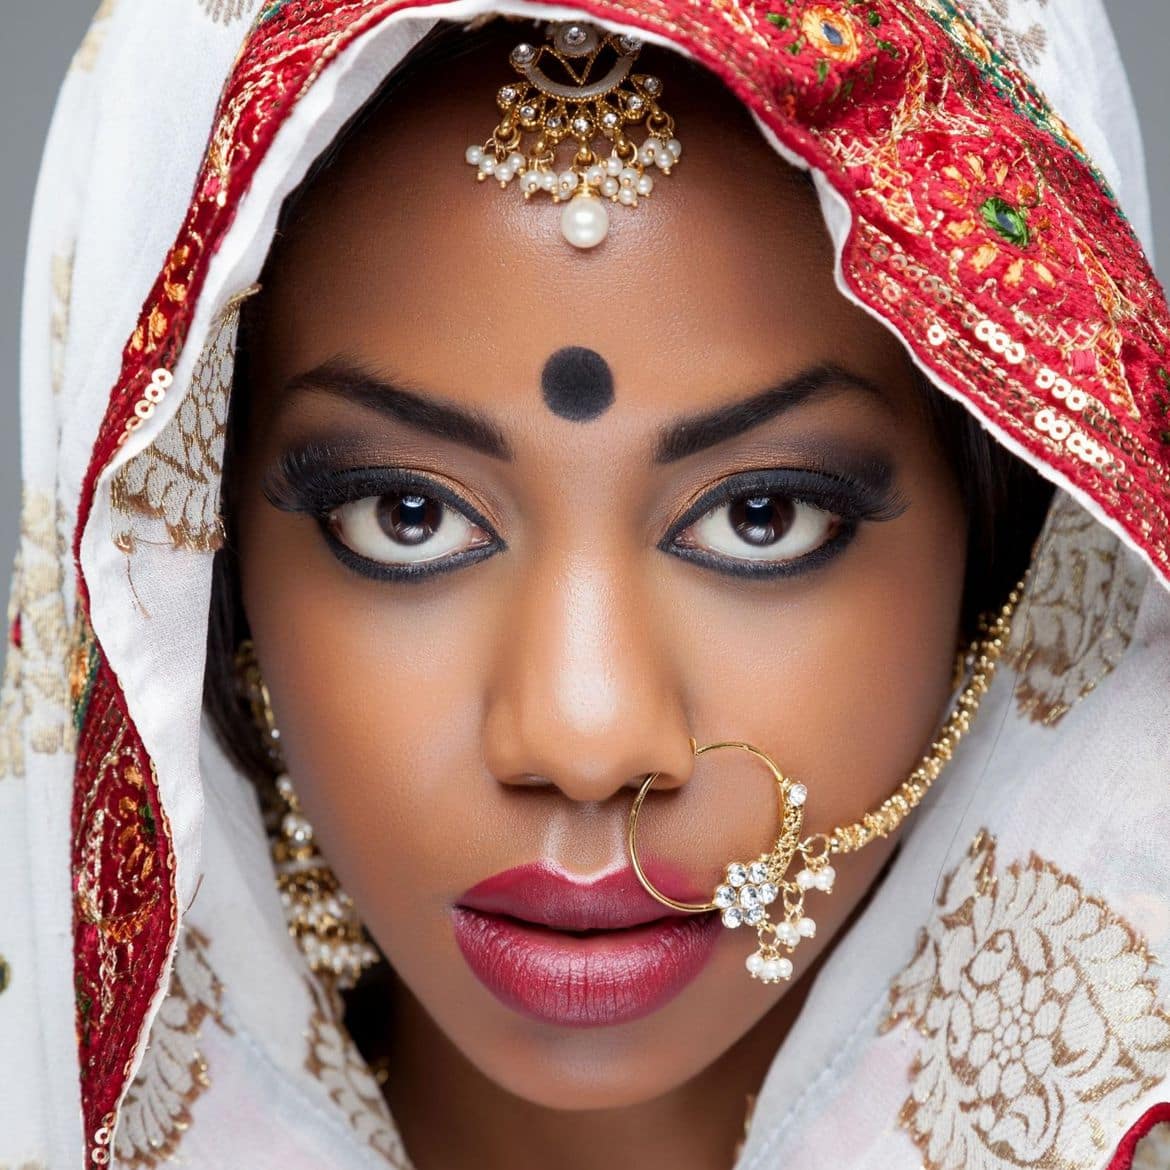 Young Indian woman in traditional clothing with bridal makeup an